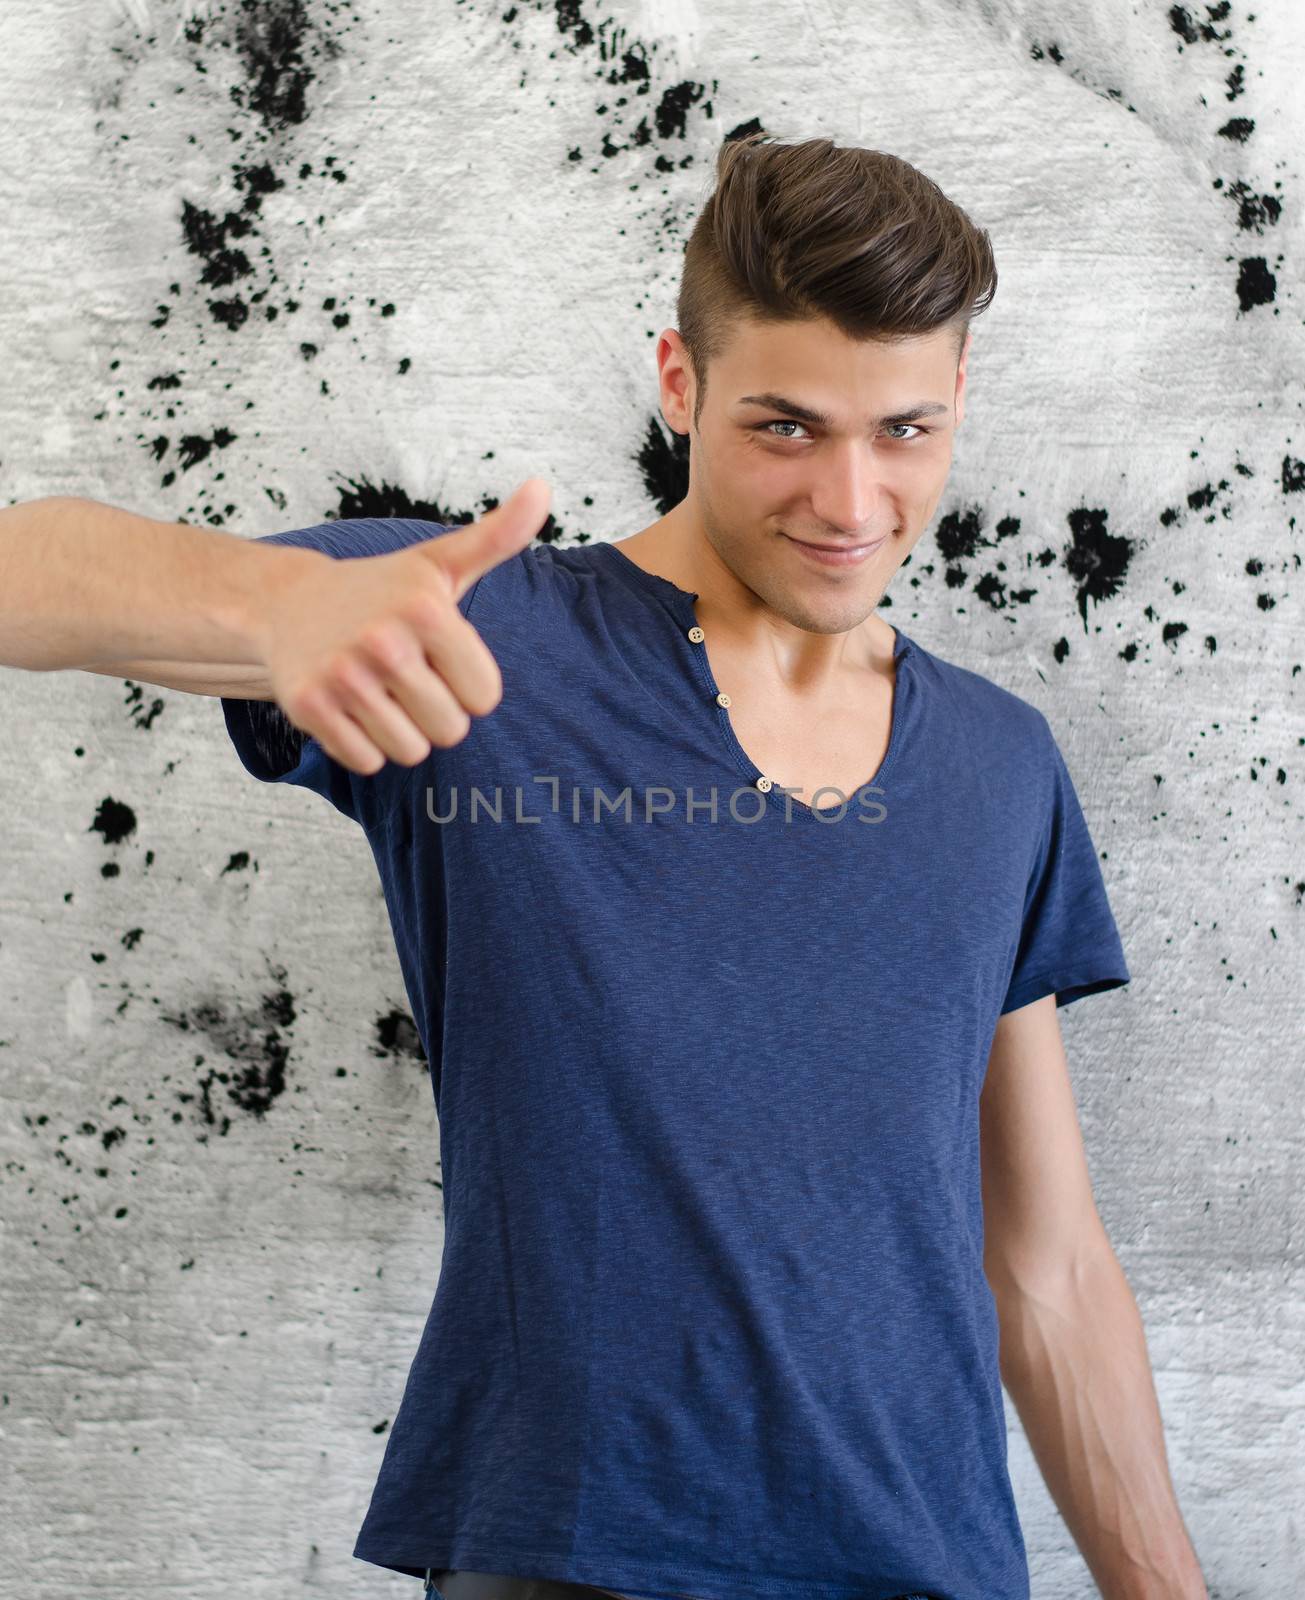 Handsome young man doing OK sign with thumb up, smiling